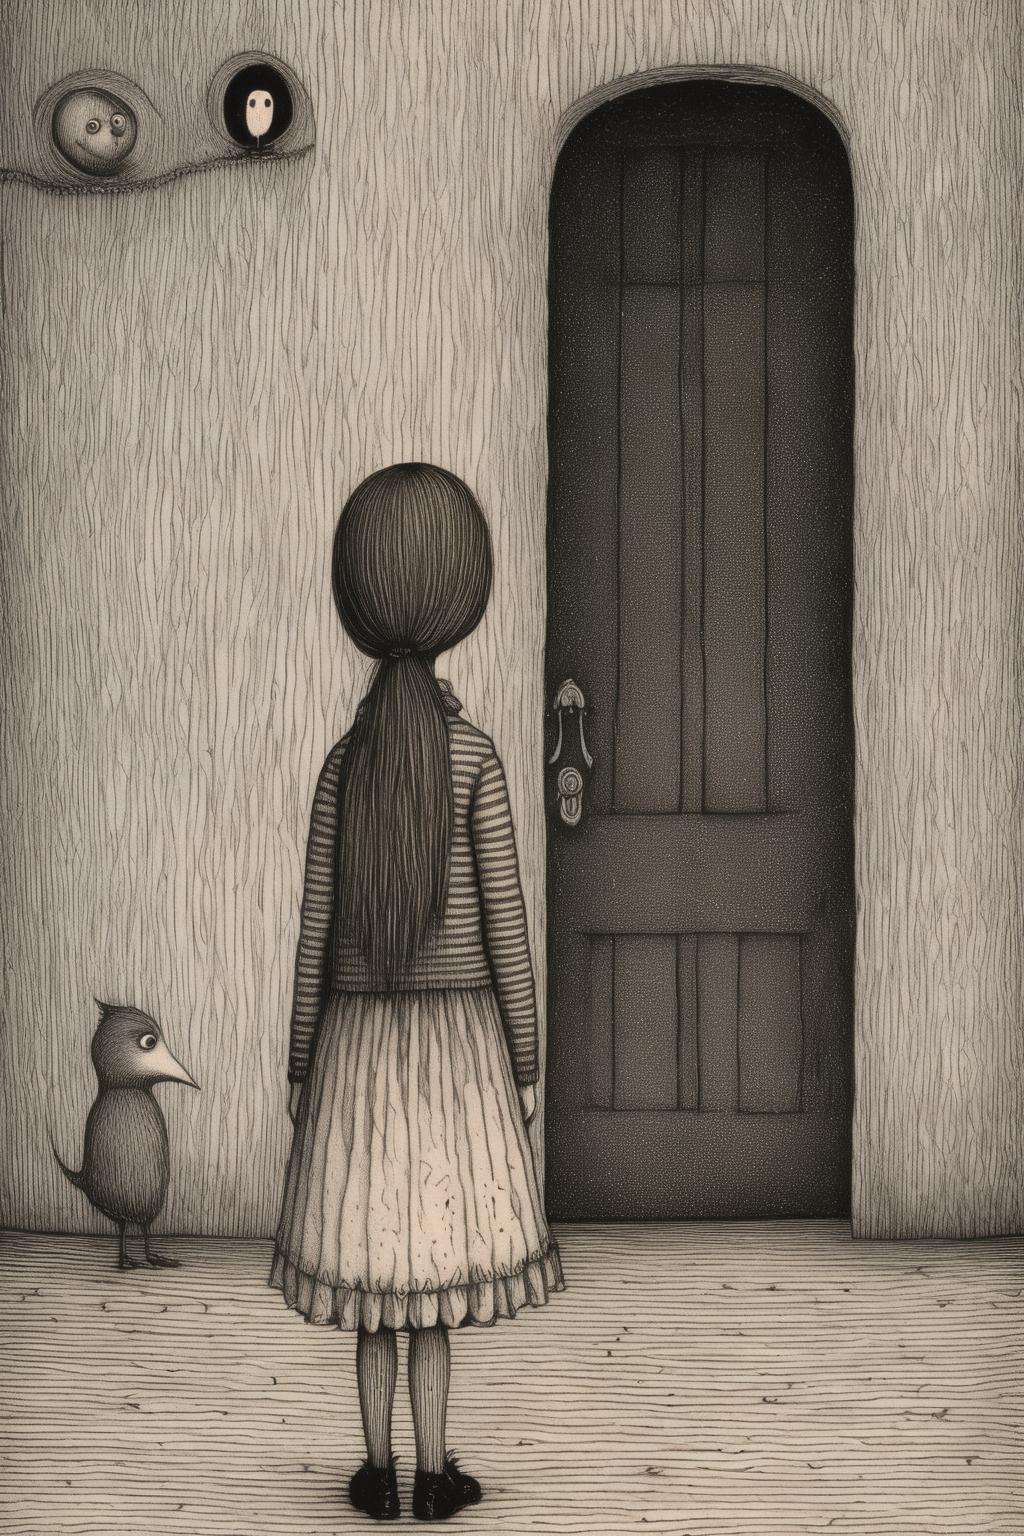 <lora:Edward Gorey Style:1>Edward Gorey Style - EdwardGorey A pretty little girl is standing there.